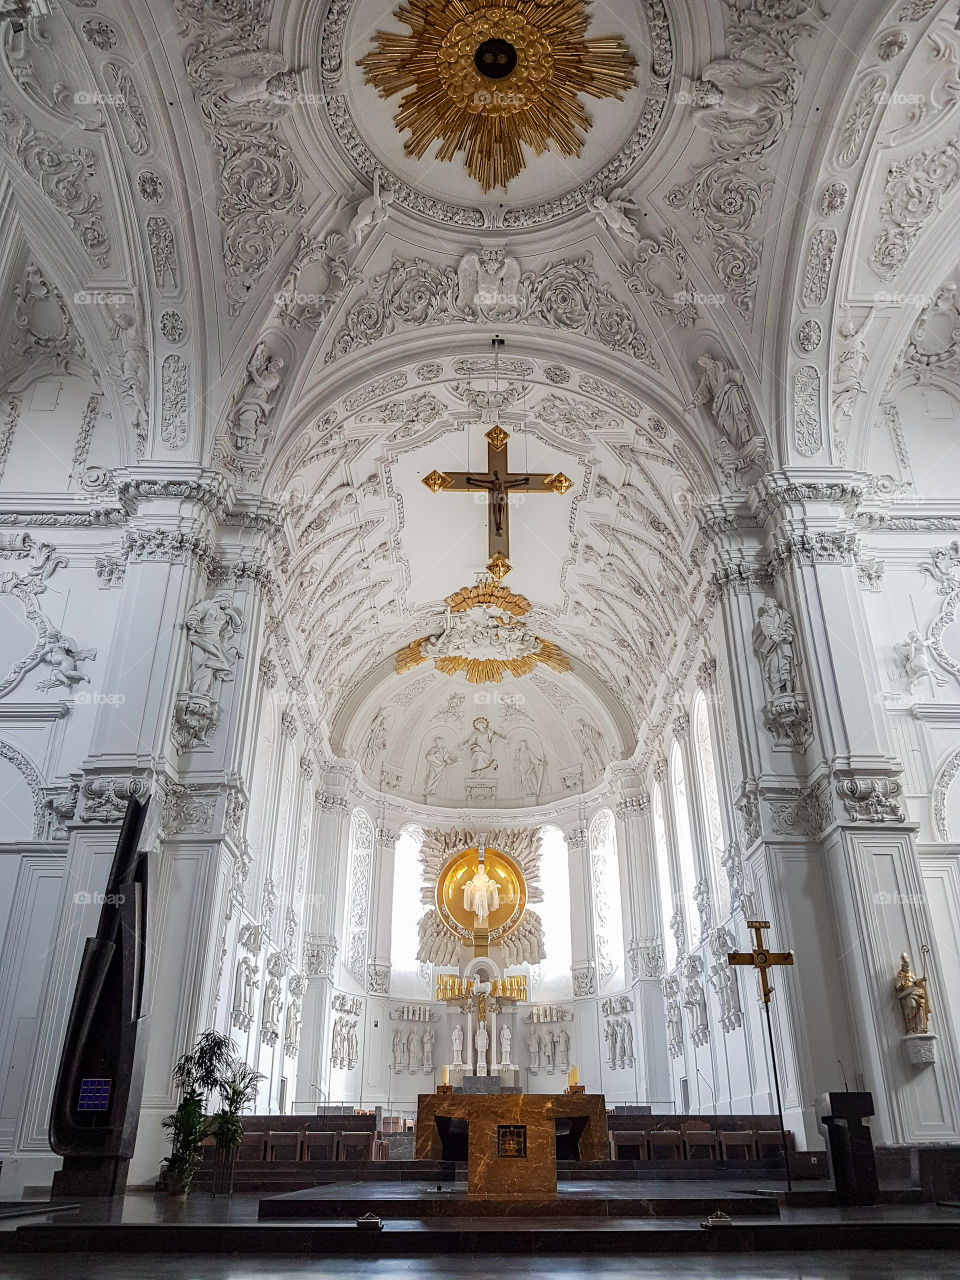 white churches interior with golden ornaments